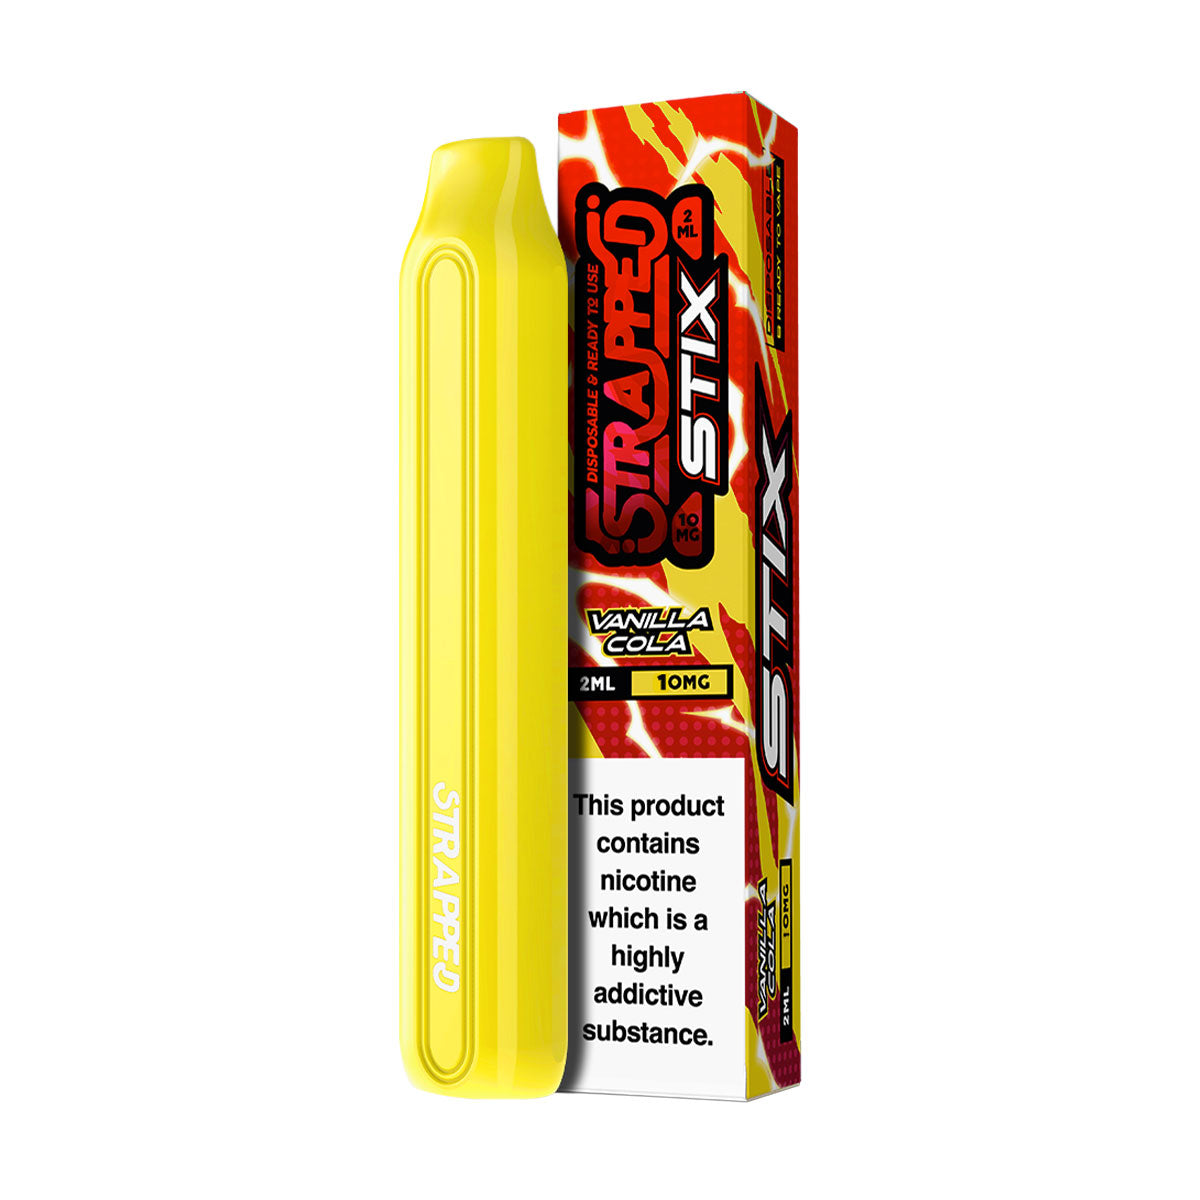 The Strapped Stix Vanilla Cola flavoured disposable vape provides the ultimate beverage flavour - smooth and creamy vanilla pods mixed masterfully with a classic cola.